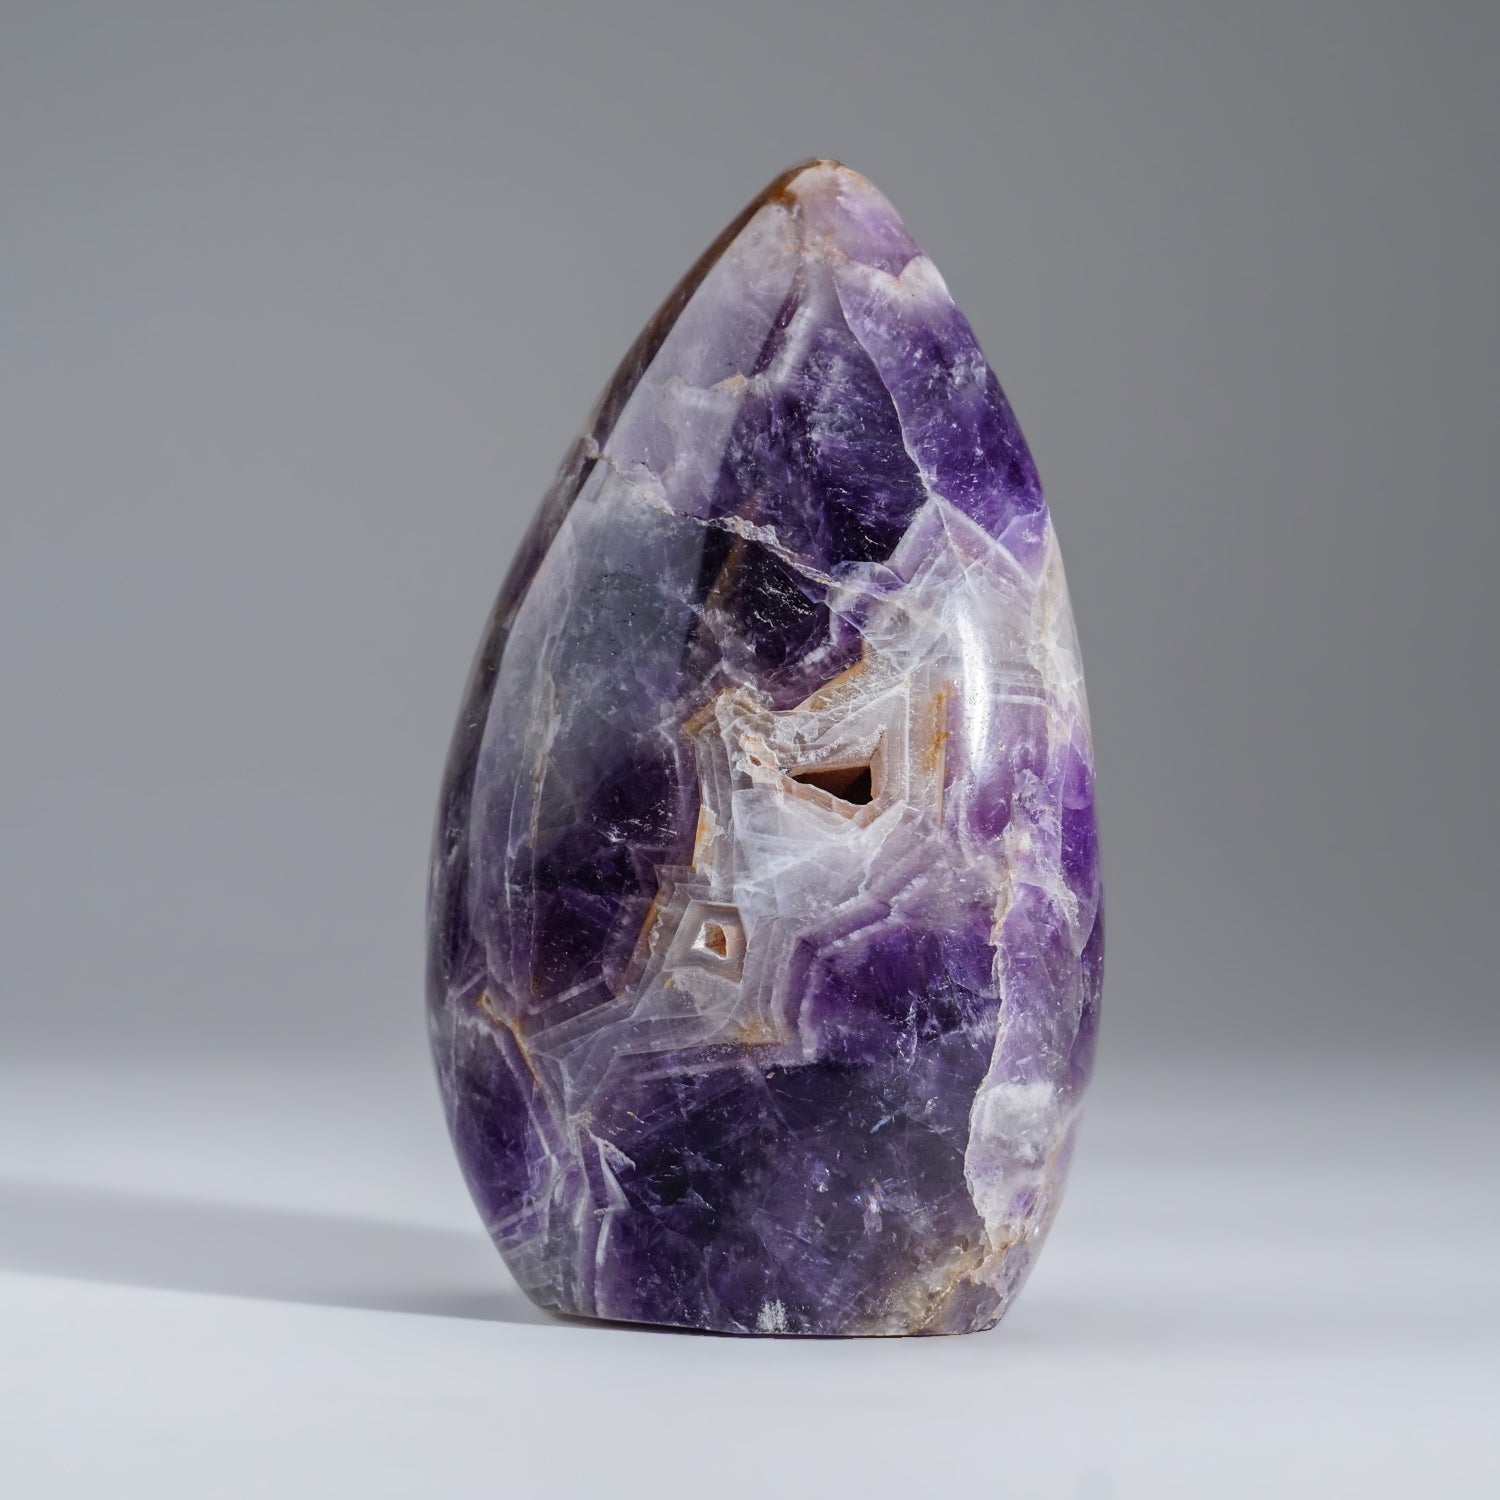 Polished Chevron Amethyst Freefrom from Brazil (2.1 lbs)